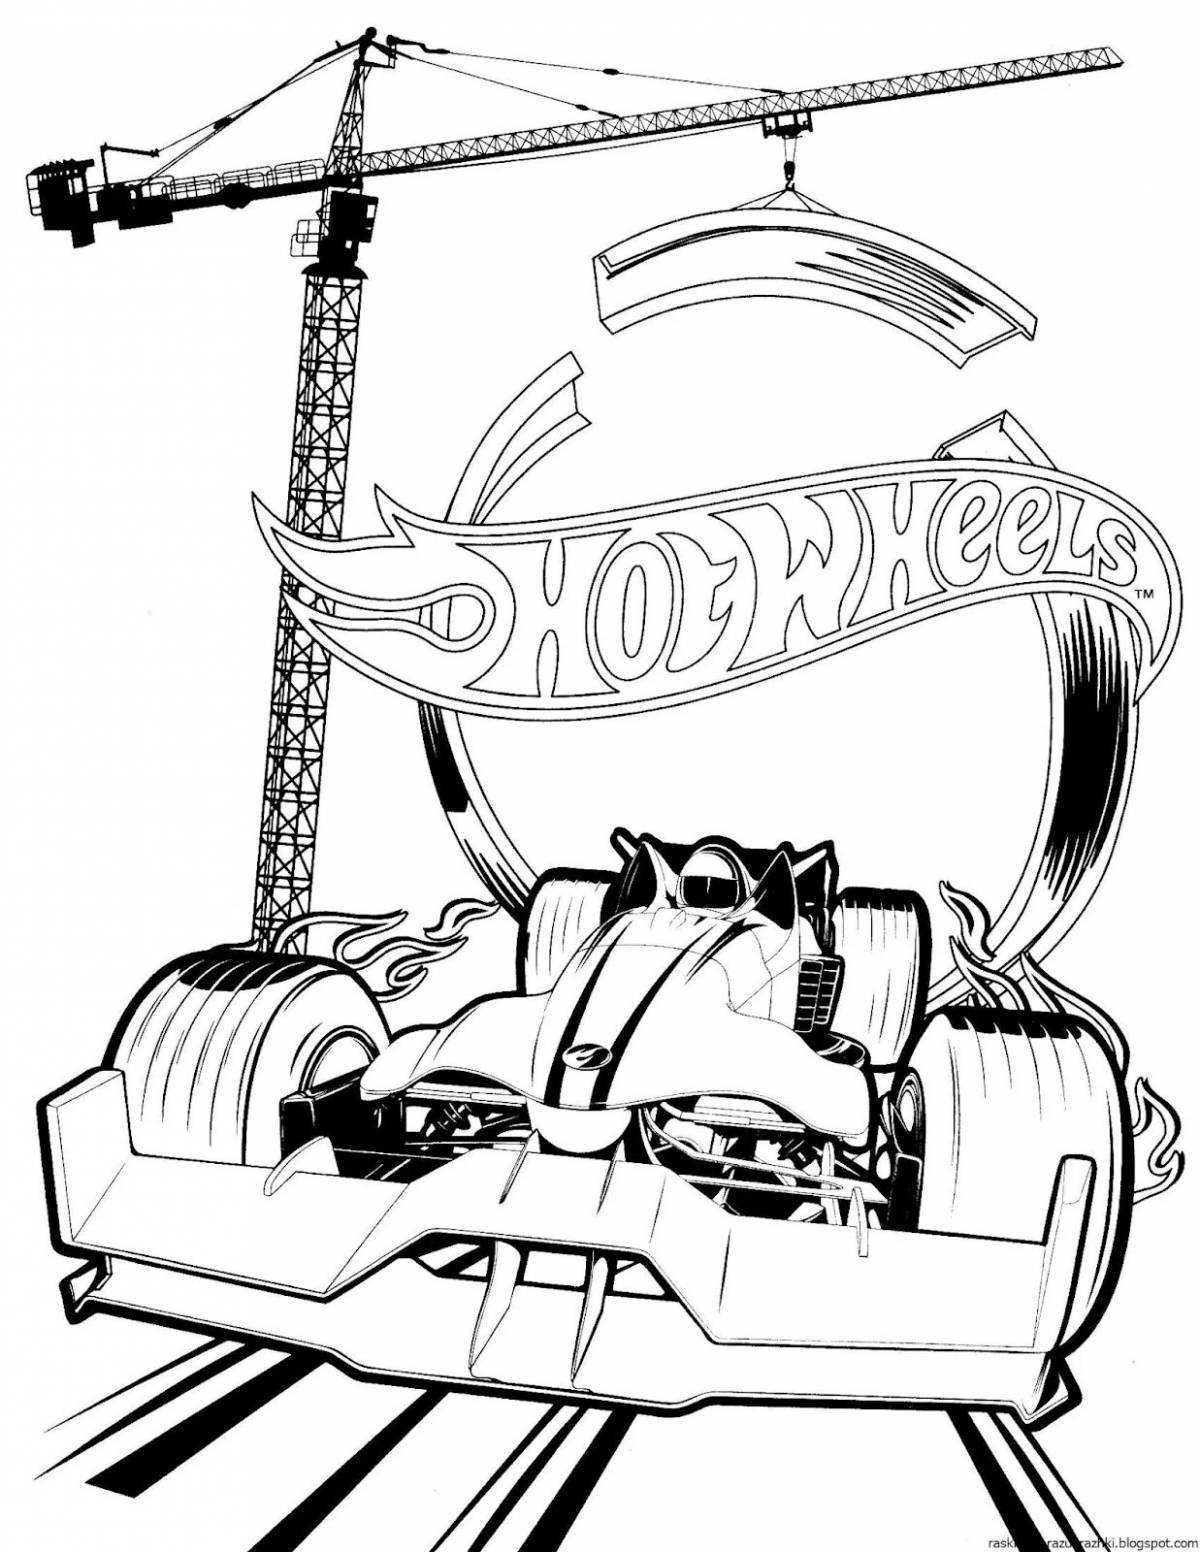 Coloring page of hot wheels tracks